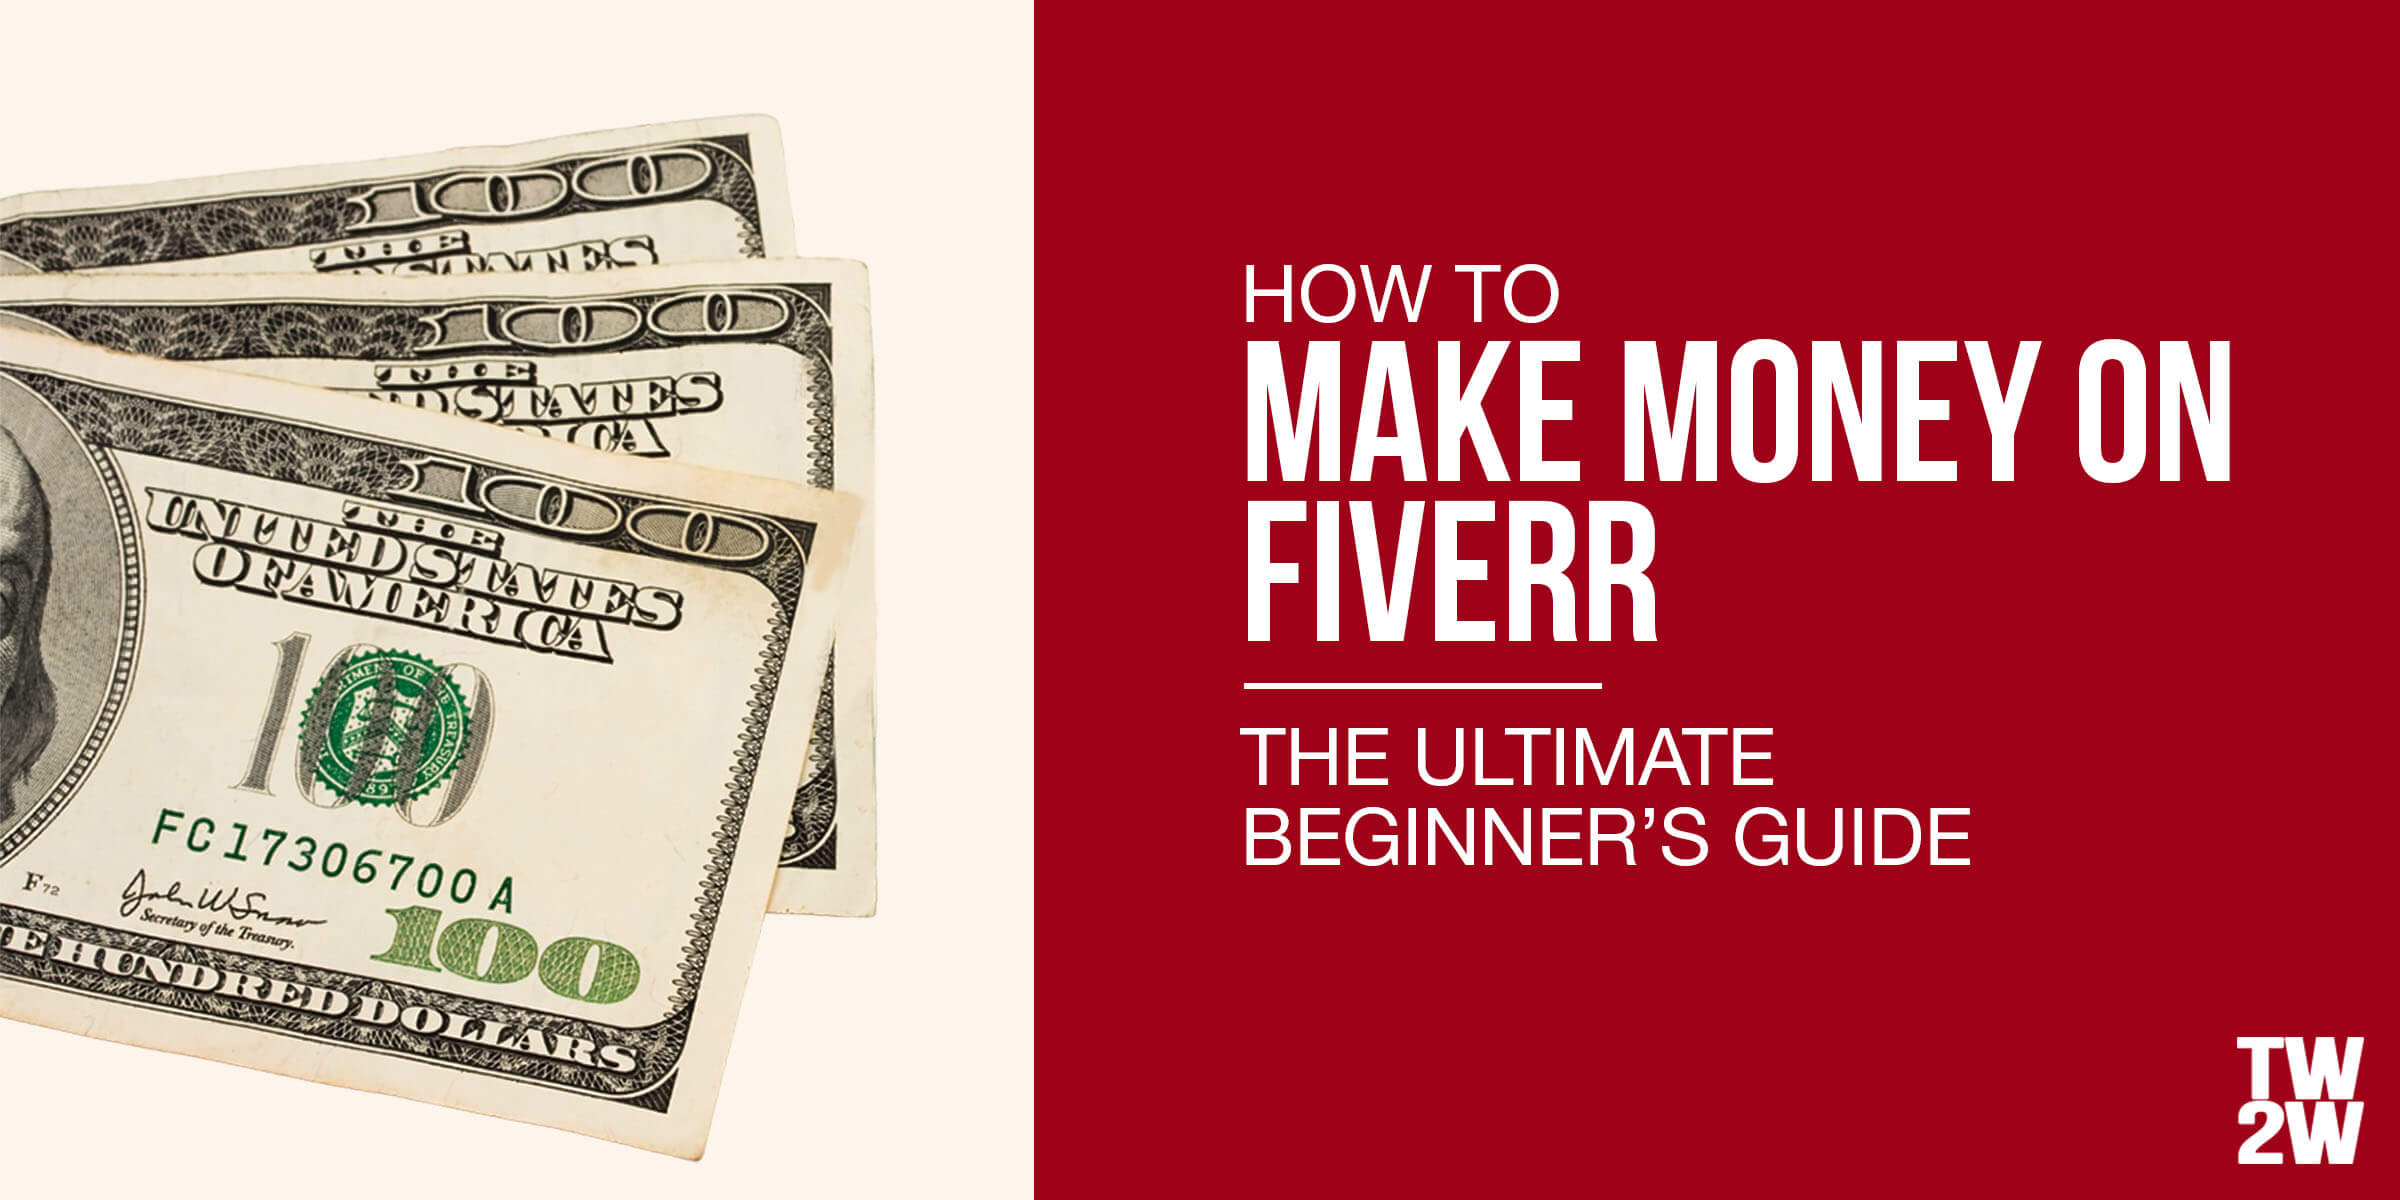 10 Tips To Become A Top Rated Seller On Fiverr